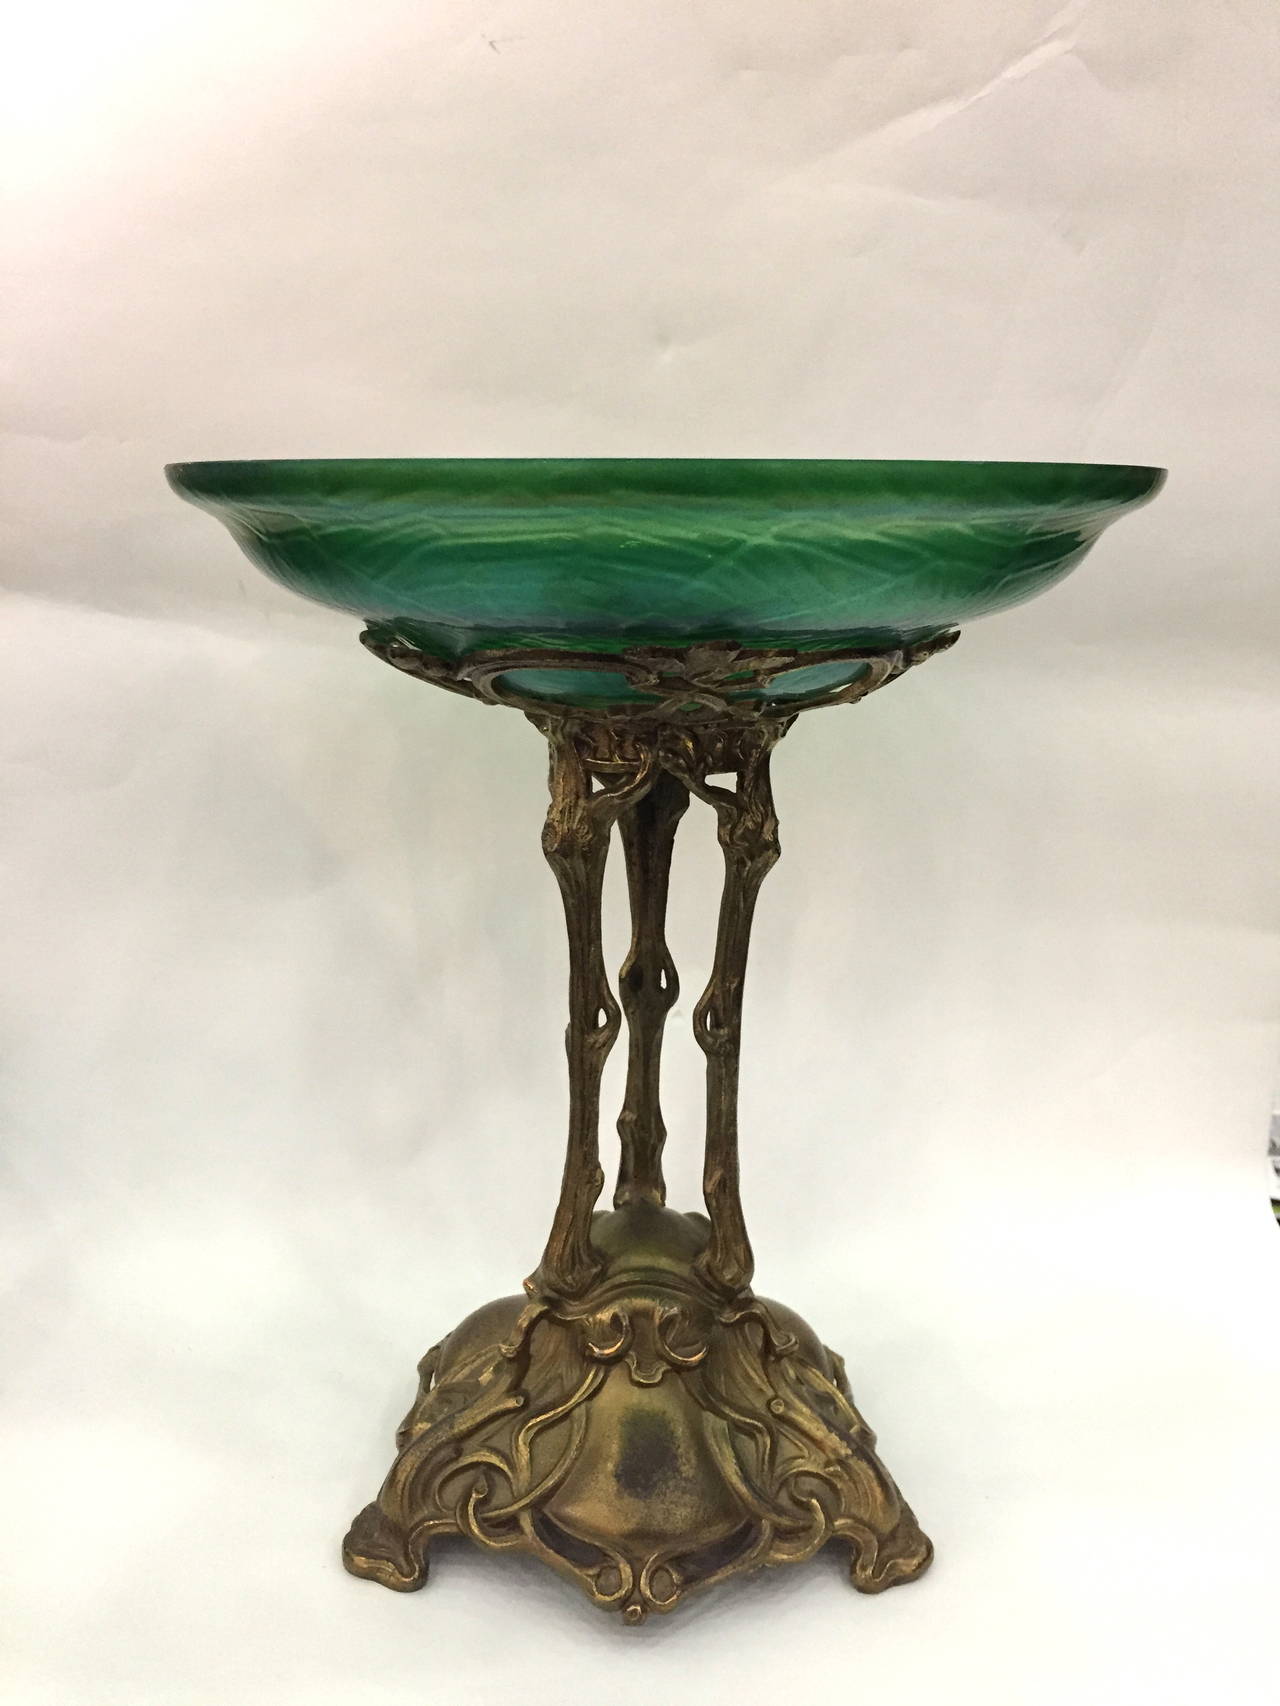 Fantastic Loetz style art glass spider web bowl on stand, very rare and in excellent.
Condition. This is centerpiece size.
Dimensions: 12.5 x 10.5.